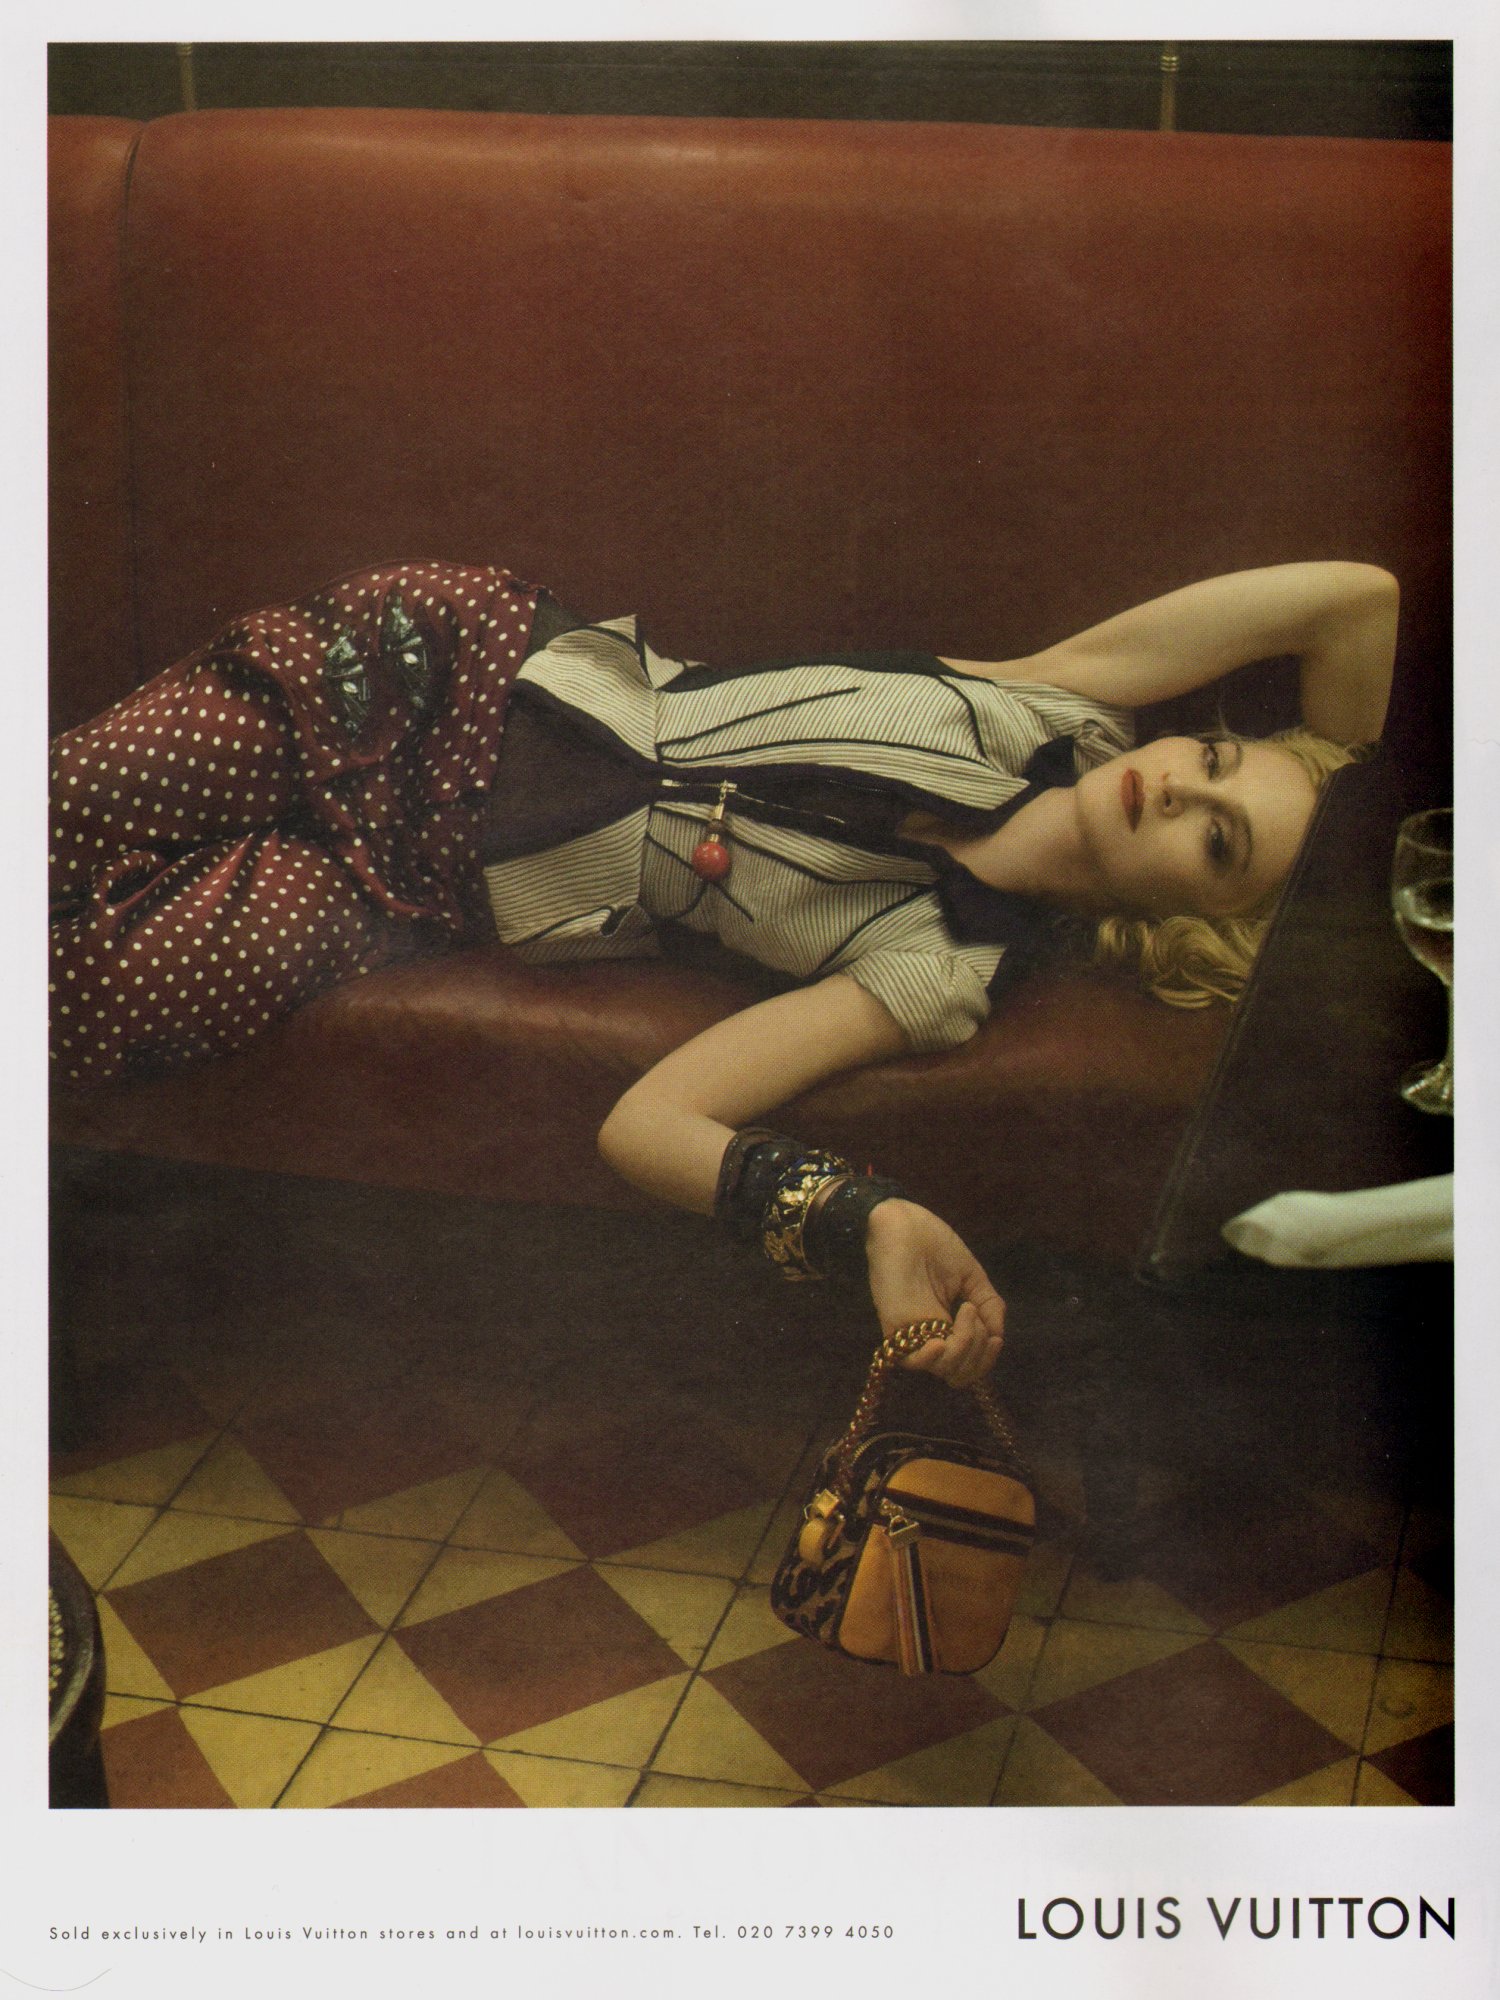 Madonna is Marc Jacobs' Louis Vuitton muse